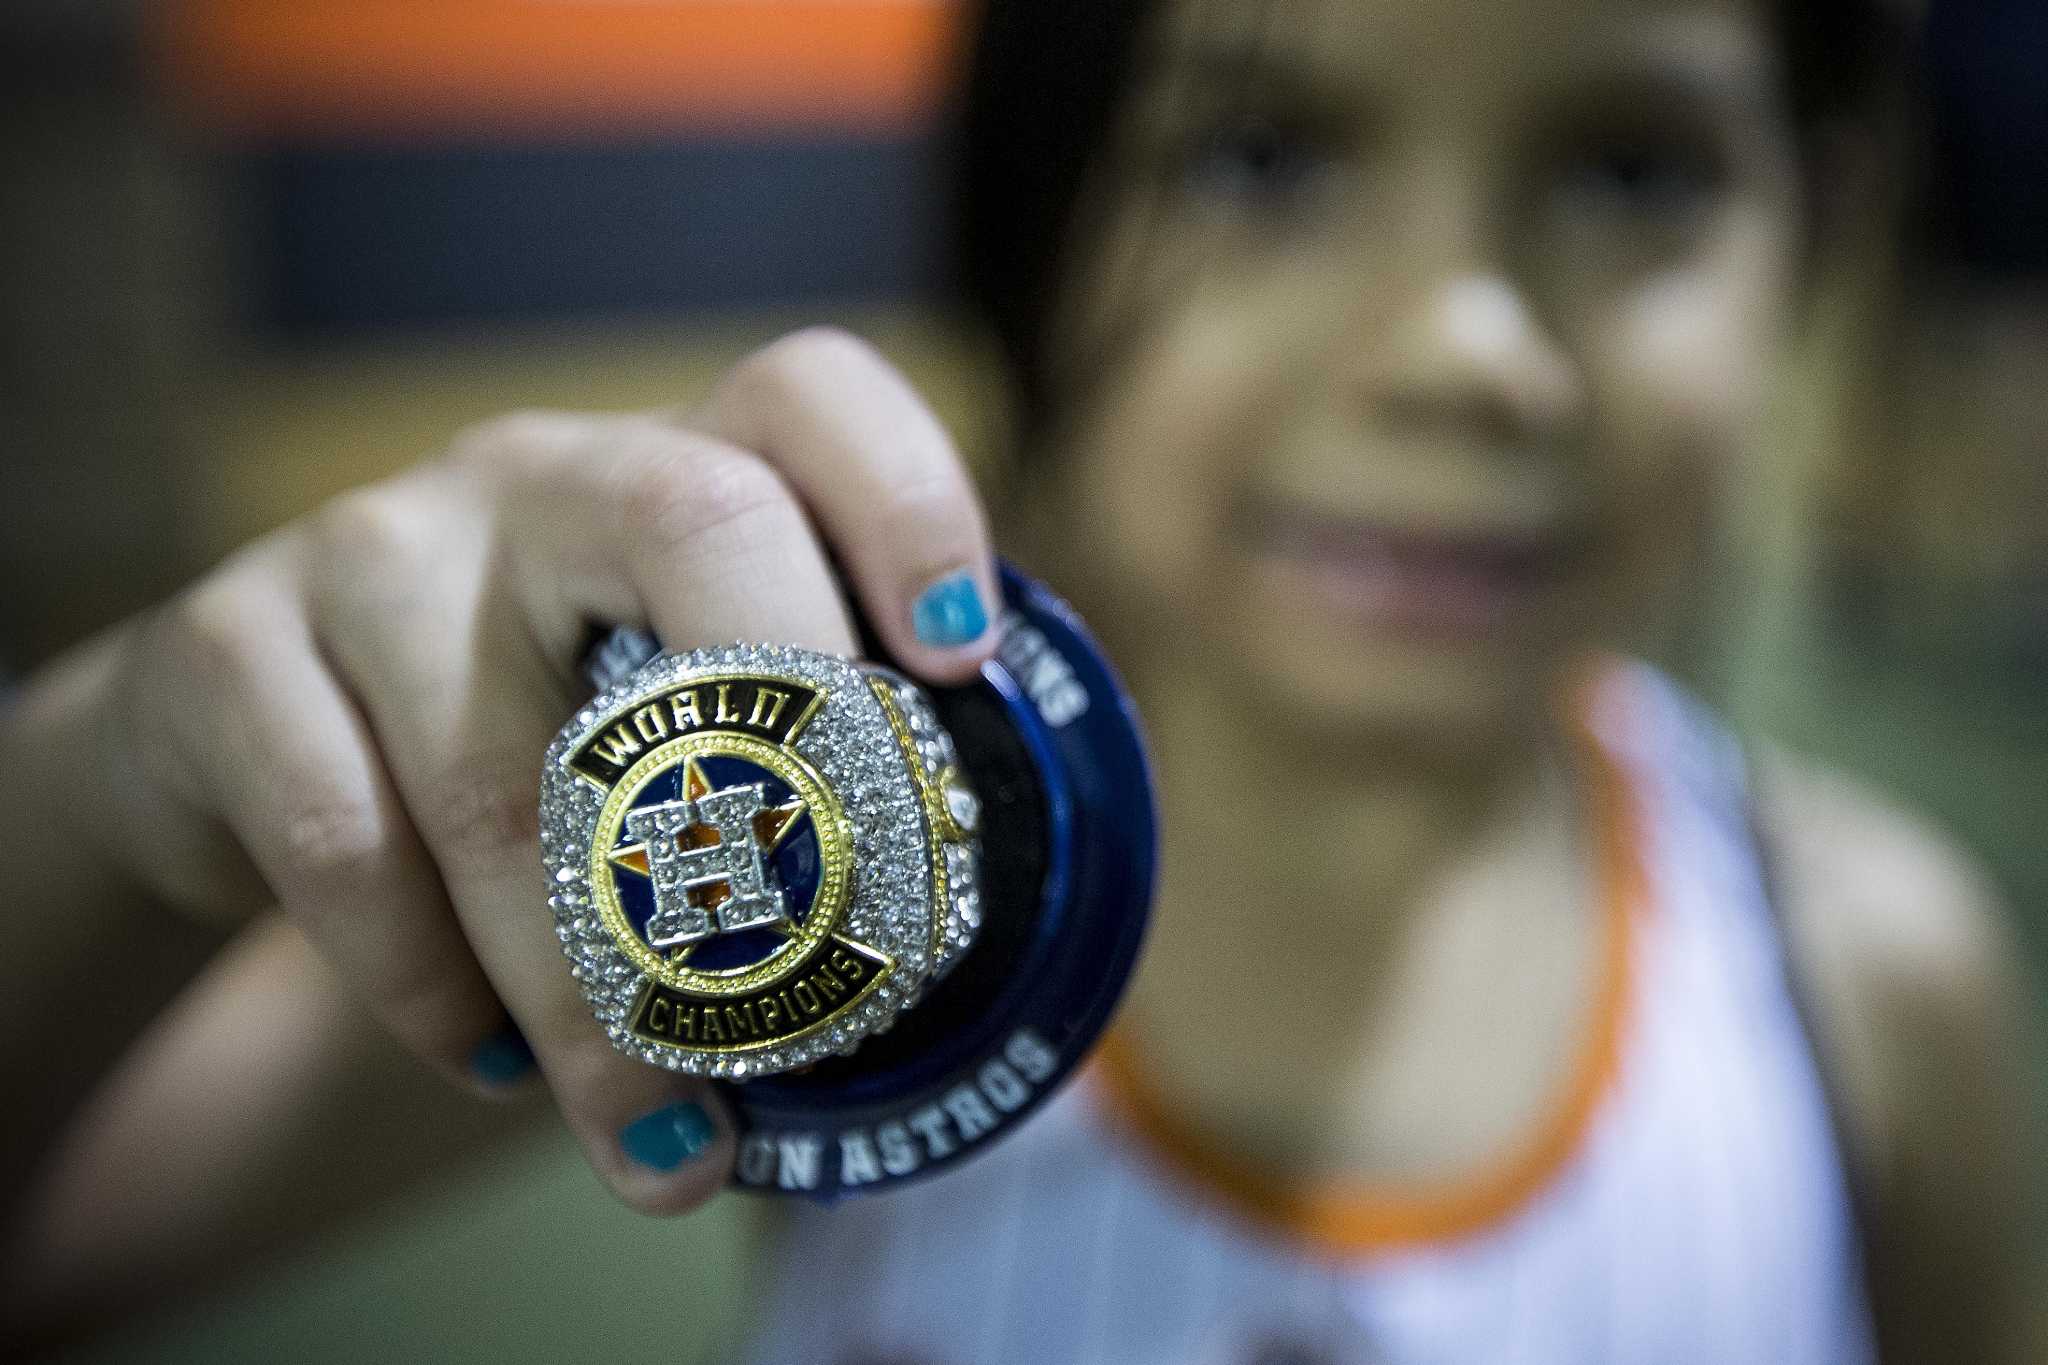 Smith Astros merit credit for giving fans meaningful memento